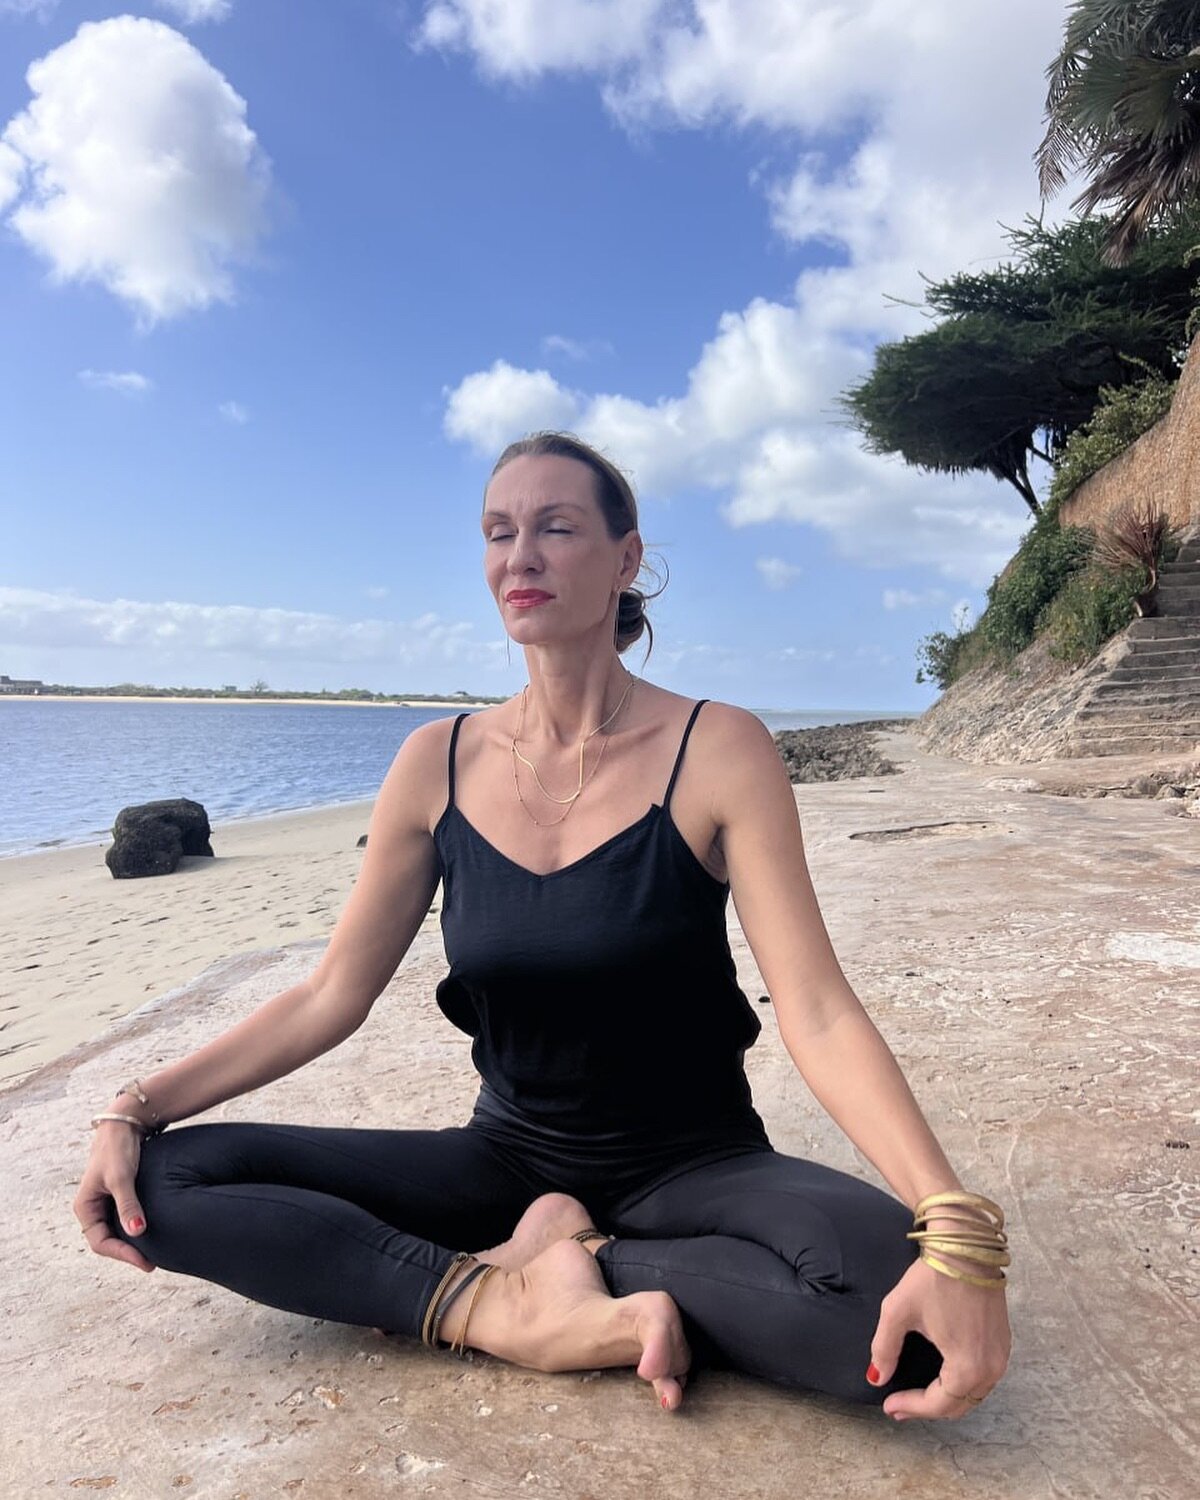 Did you know that something as simple as meditation can actually change your brain? 

It&rsquo;s fascinating! When we sit down, close our eyes, and focus on our breath, we&rsquo;re not just seeking a moment of peace. We&rsquo;re engaging in a powerfu